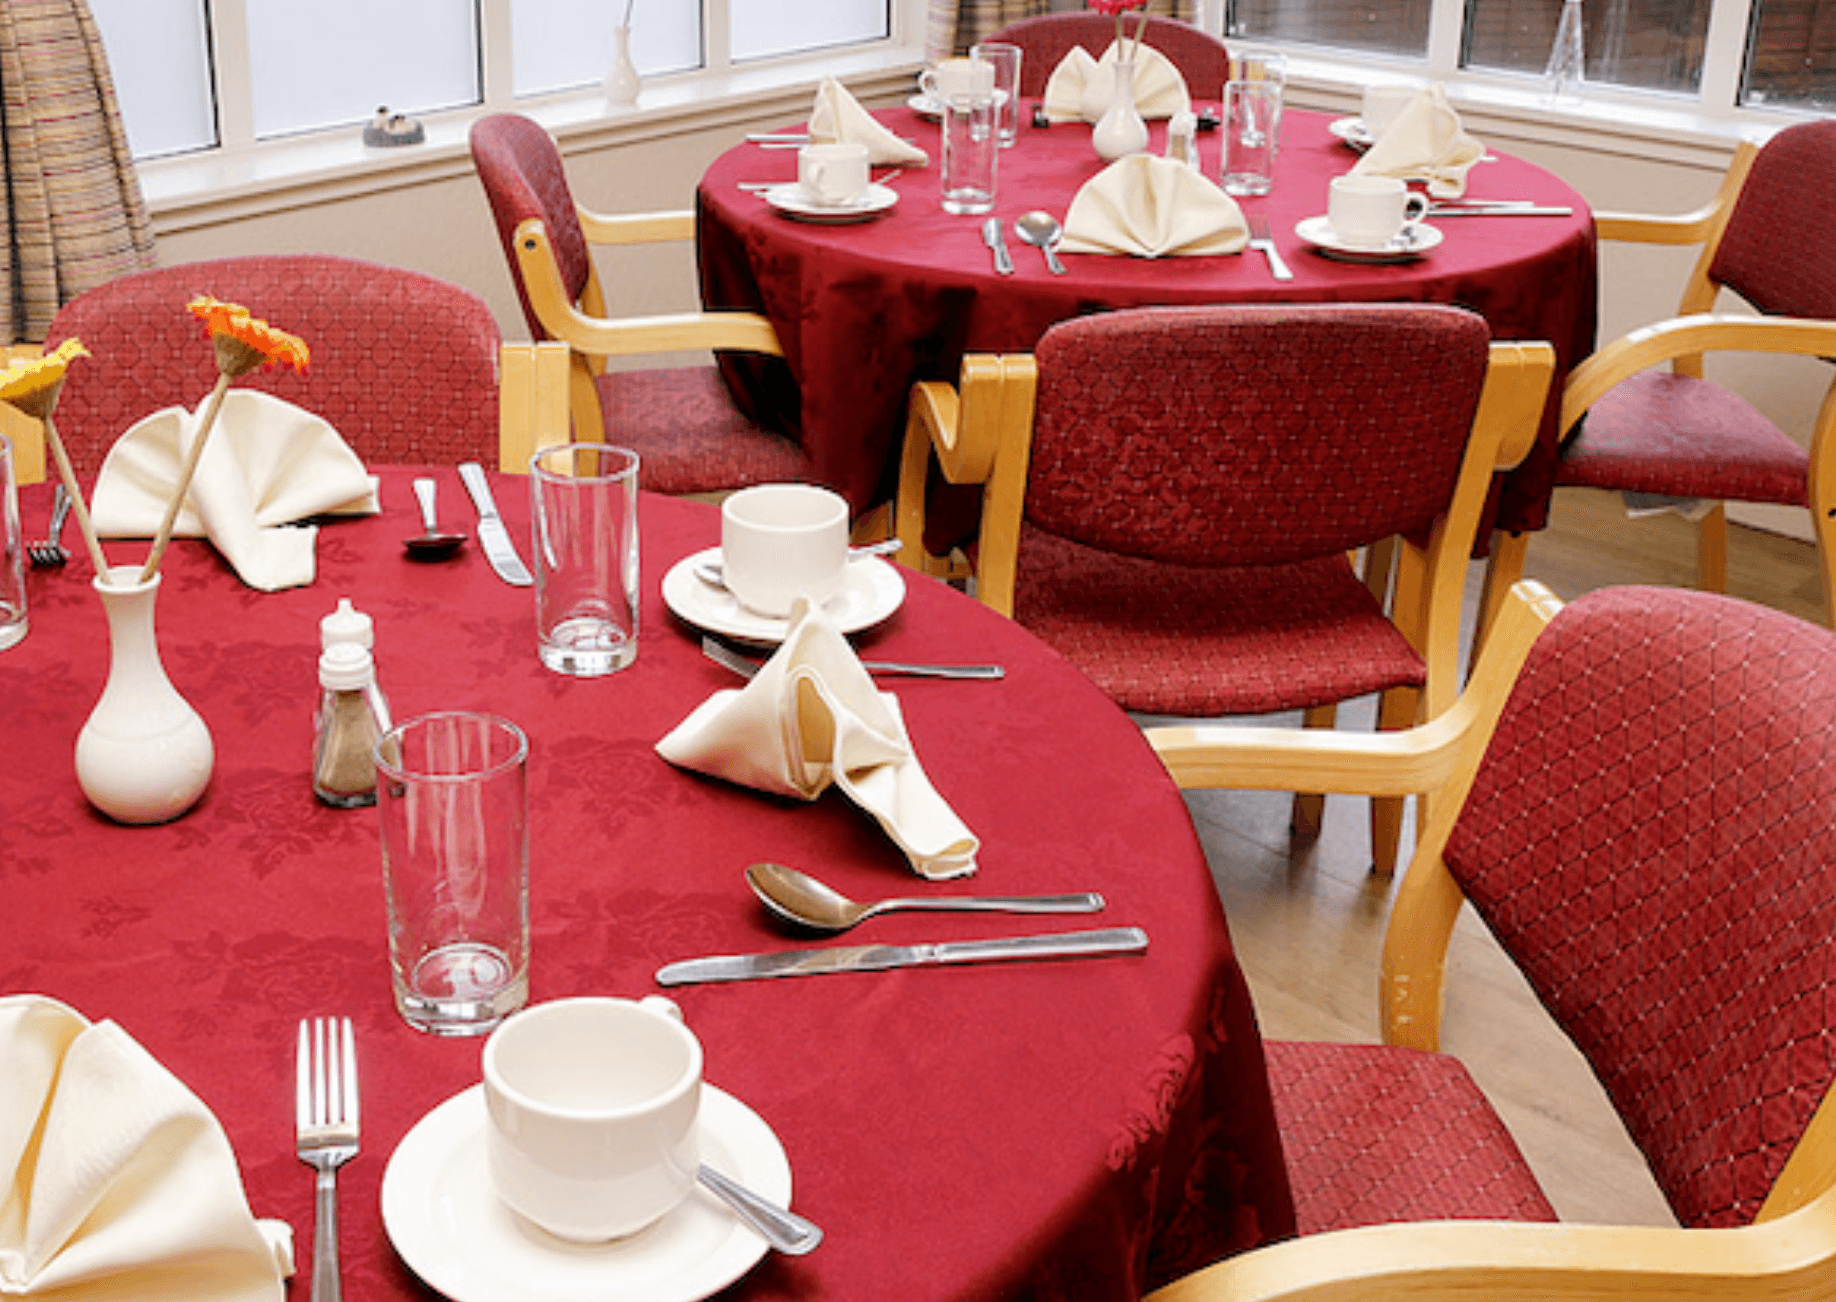 Dining room of Norwood care home in Barrhead, Scotland